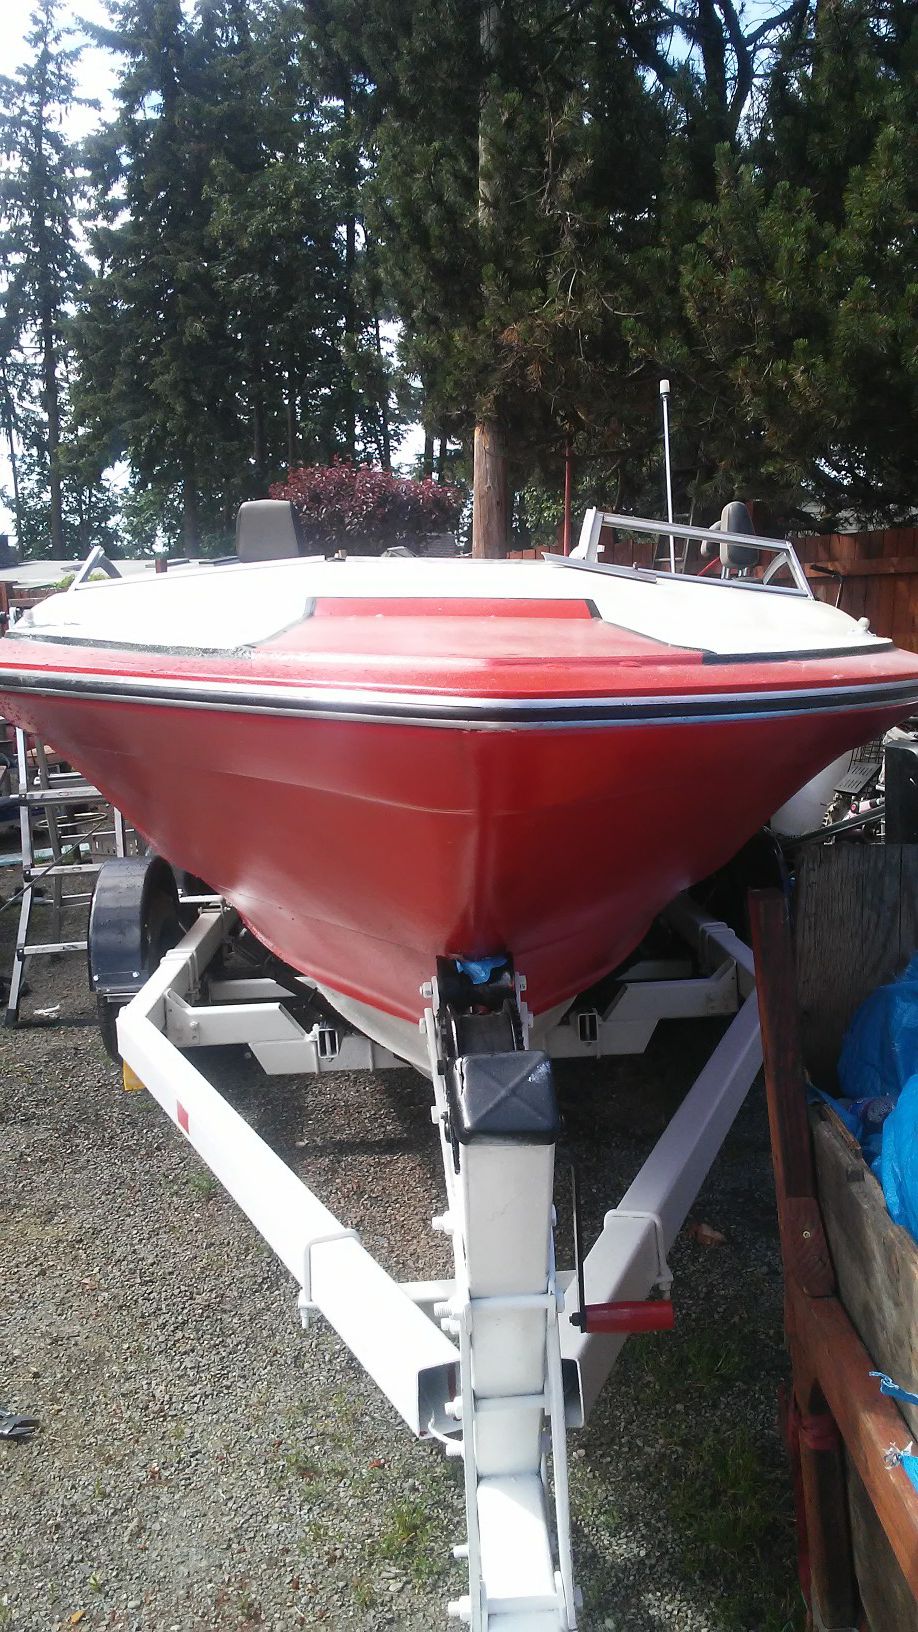 85 Bayliner ski boat with great engine in process of remodel with ez load trailor